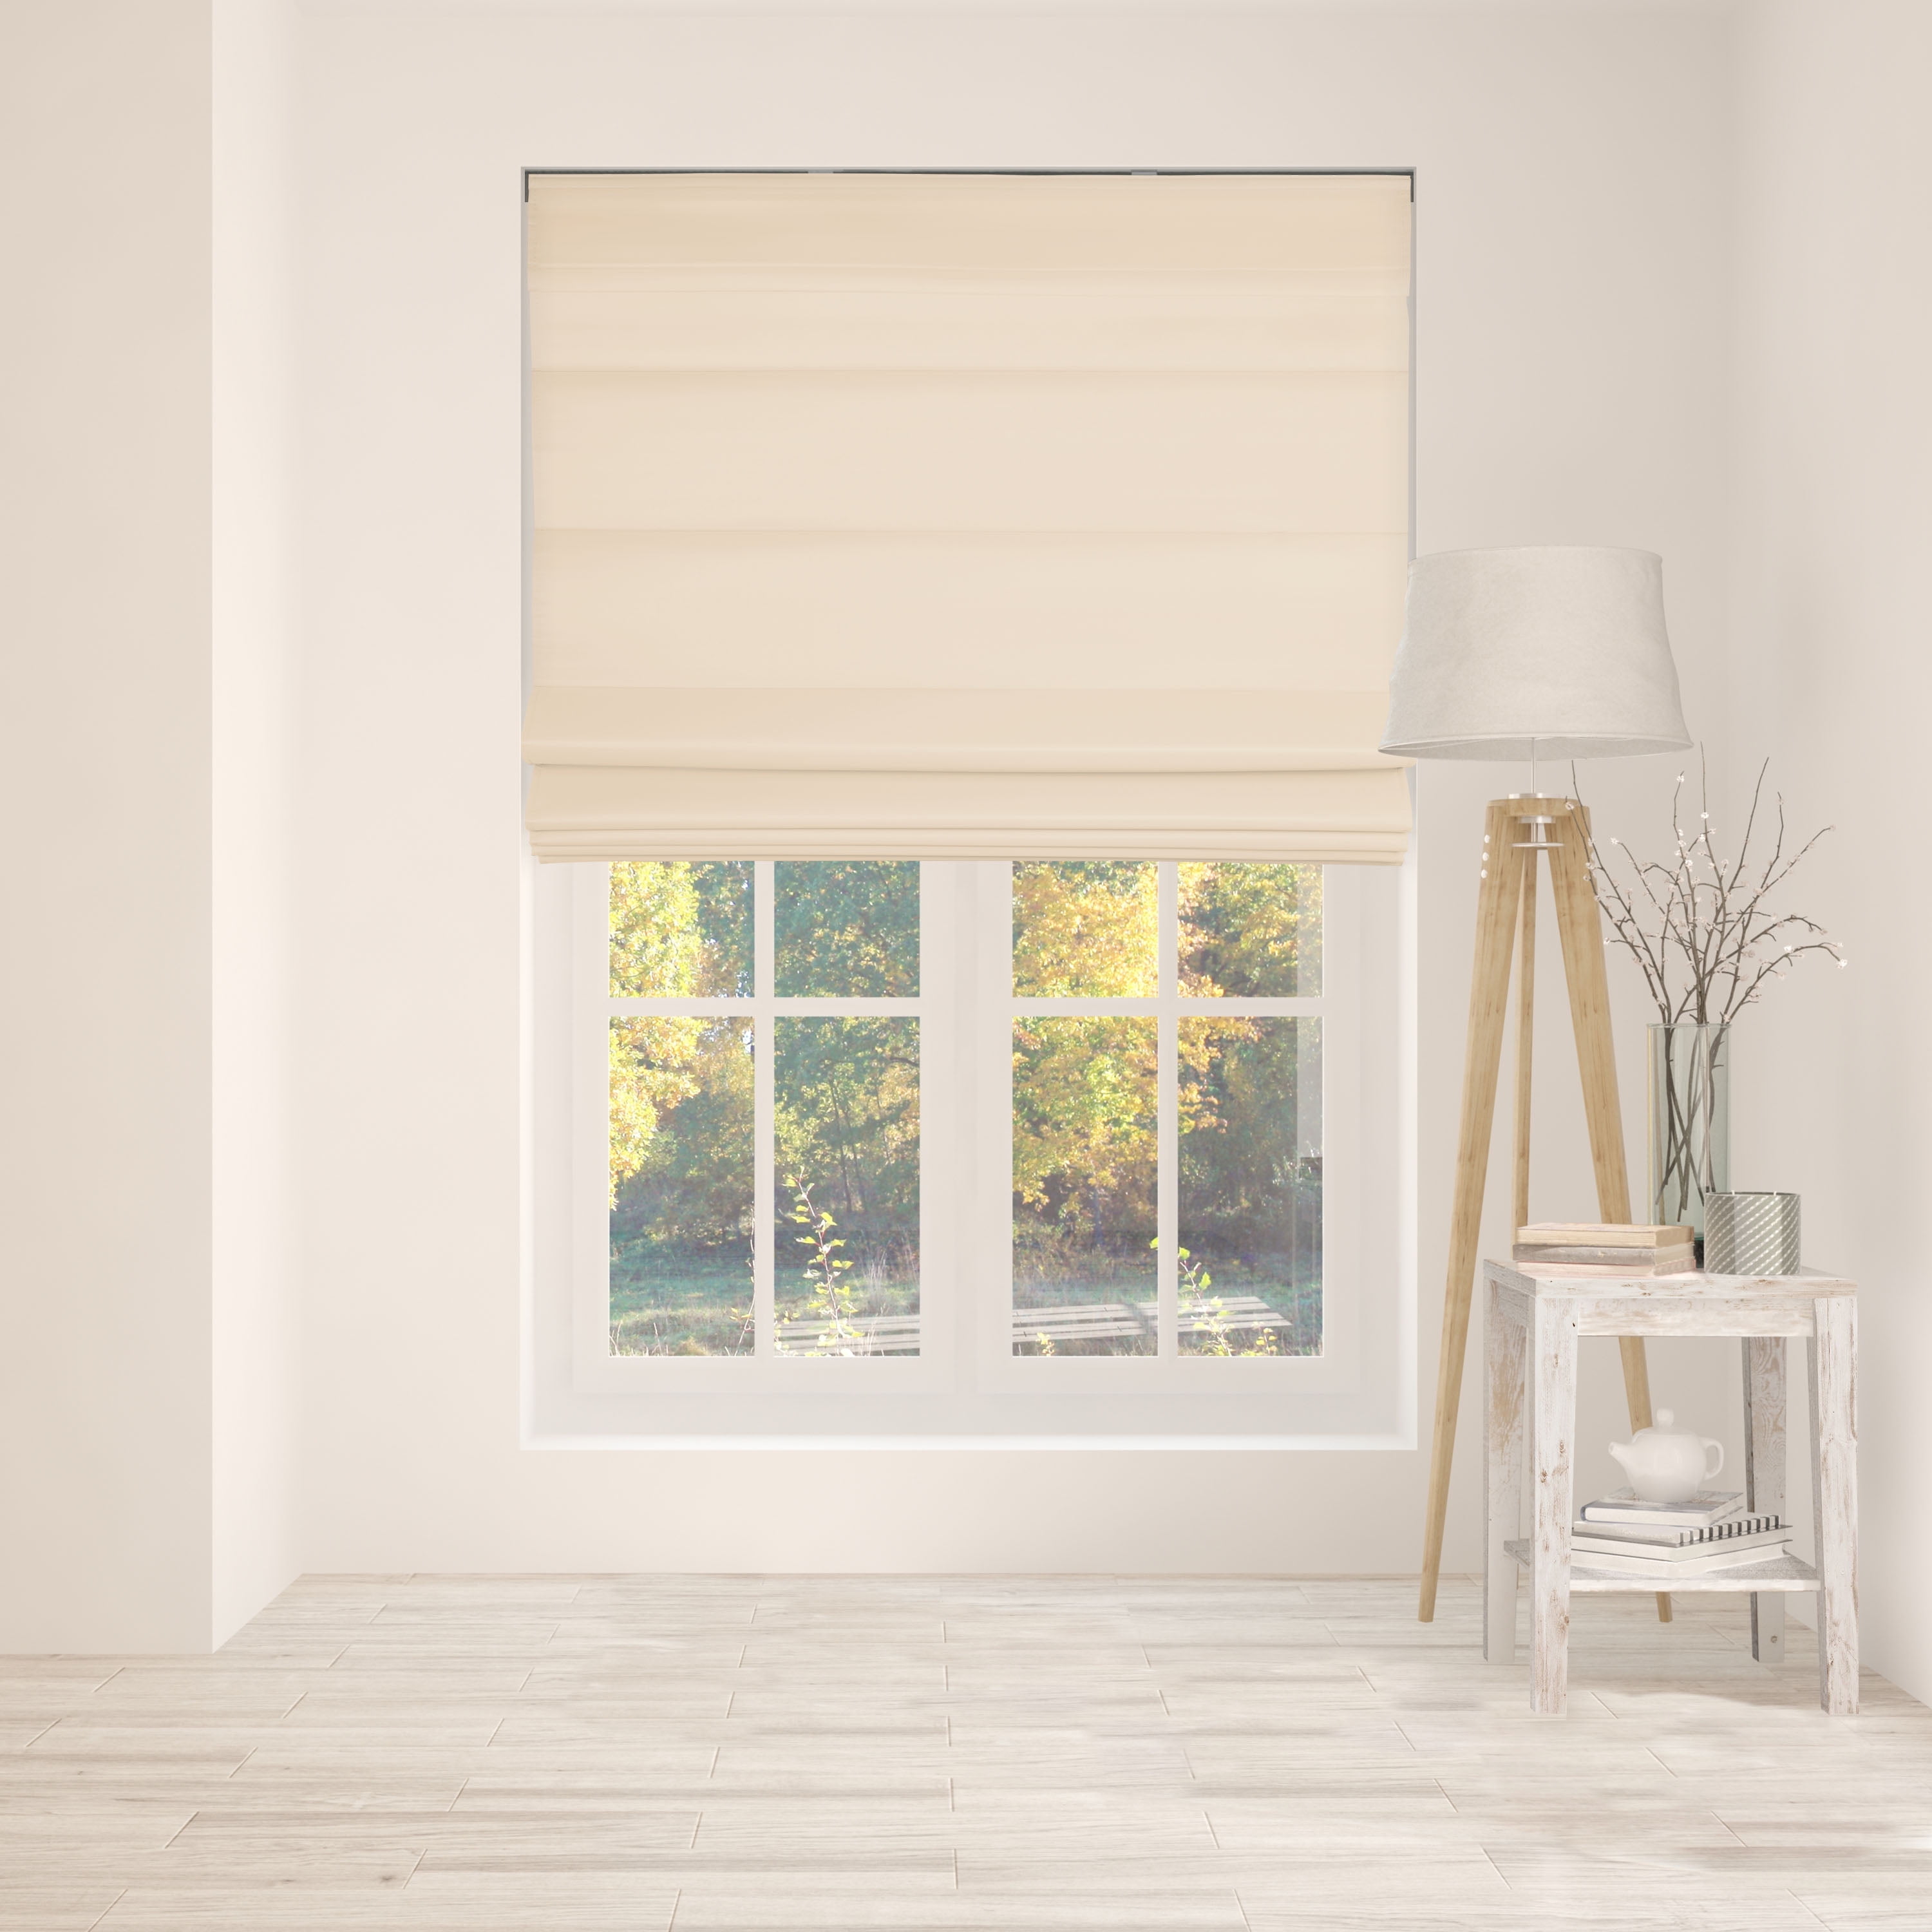 Size: 34 W X 72 H Cordless Lift Window Blinds Color: White Arlo Blinds Thermal Room Darkening Fabric Roman Shades